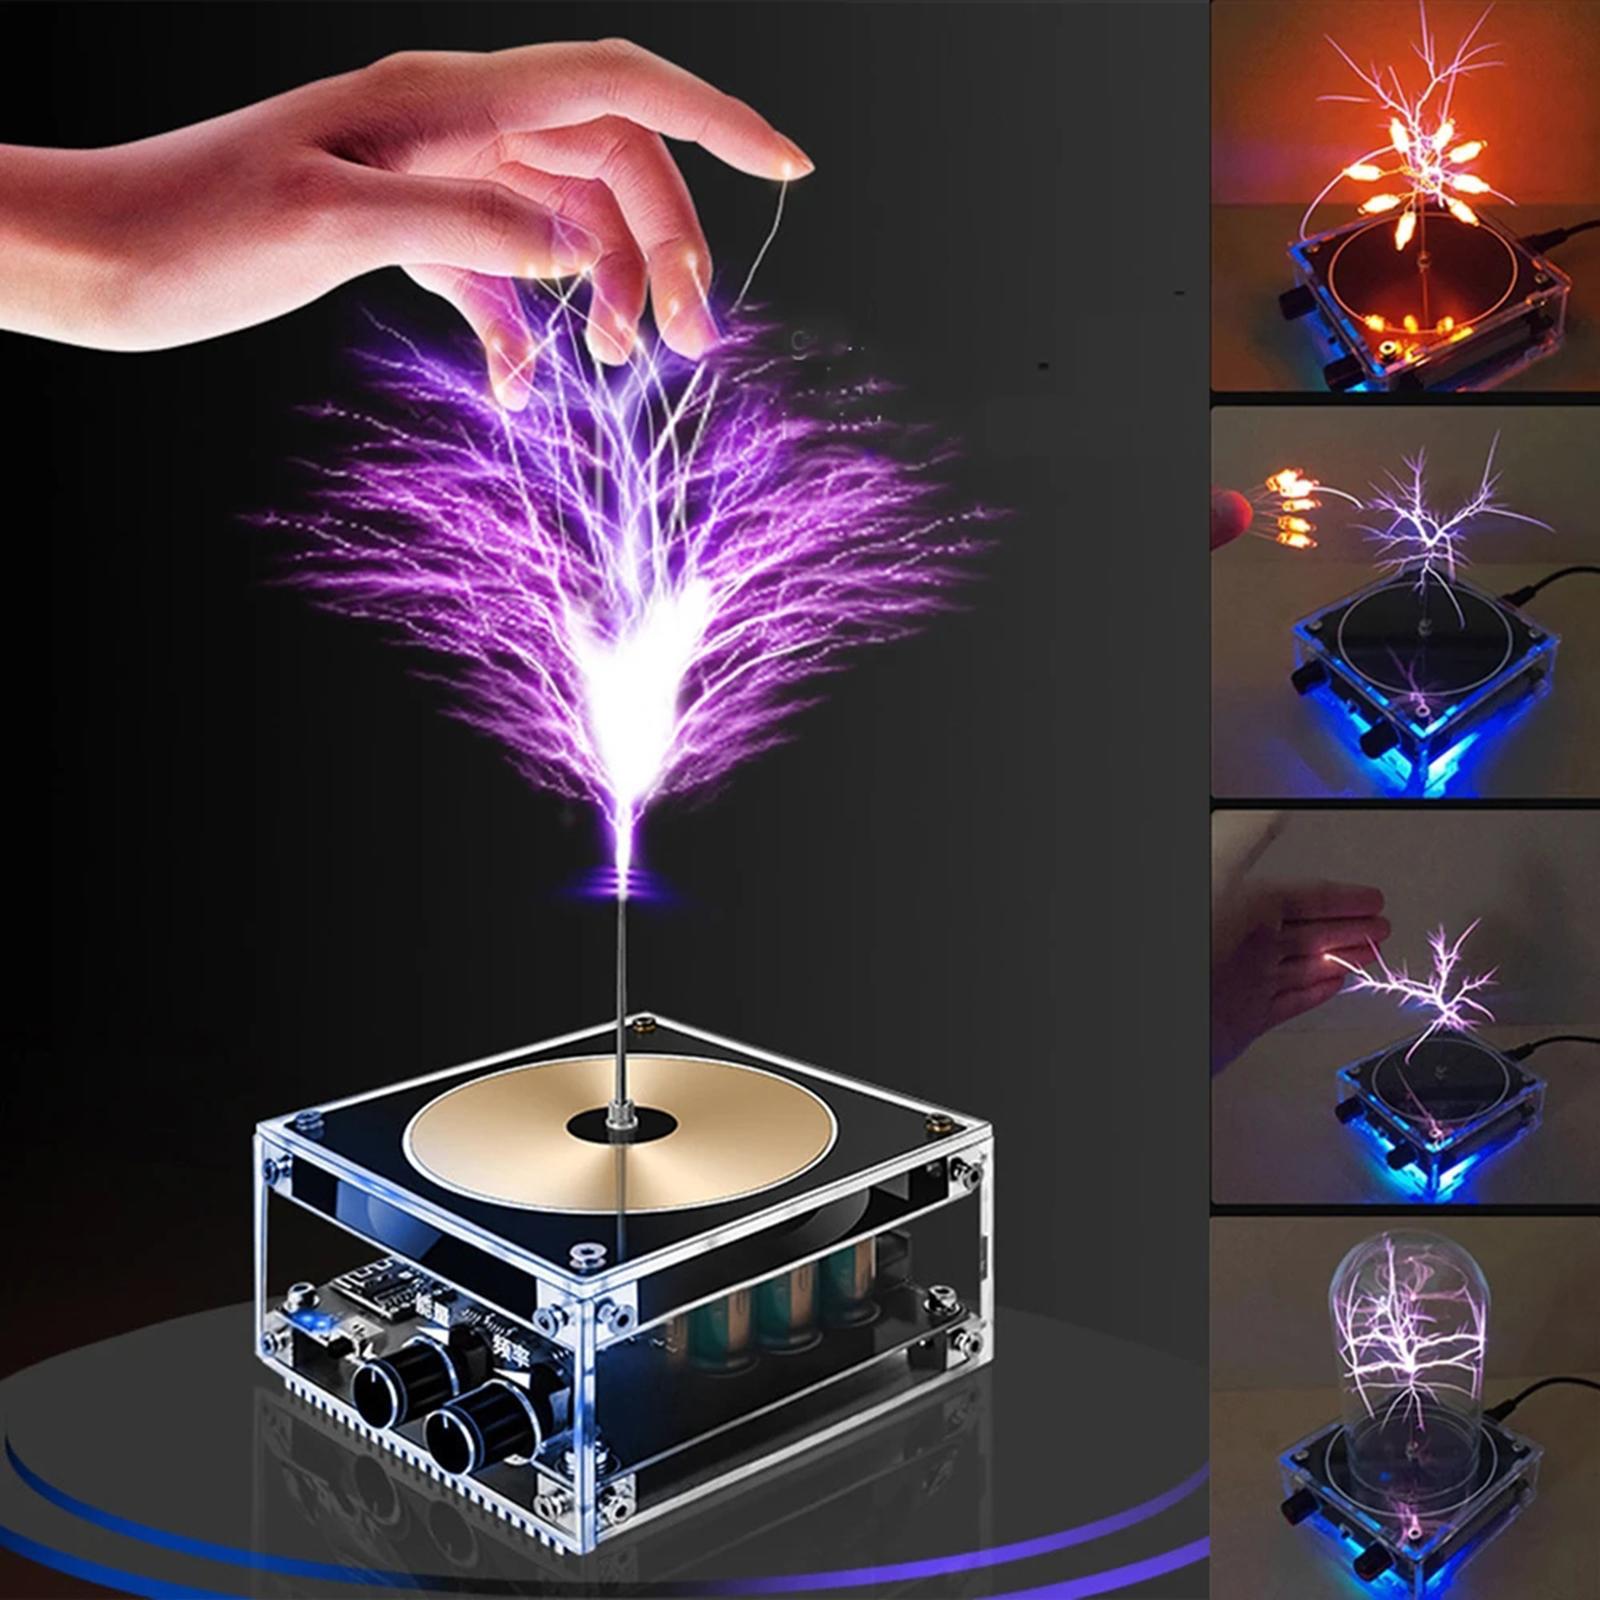 Music Tesla Coil Artificial Experimental Product Teaching Education Tool Toy